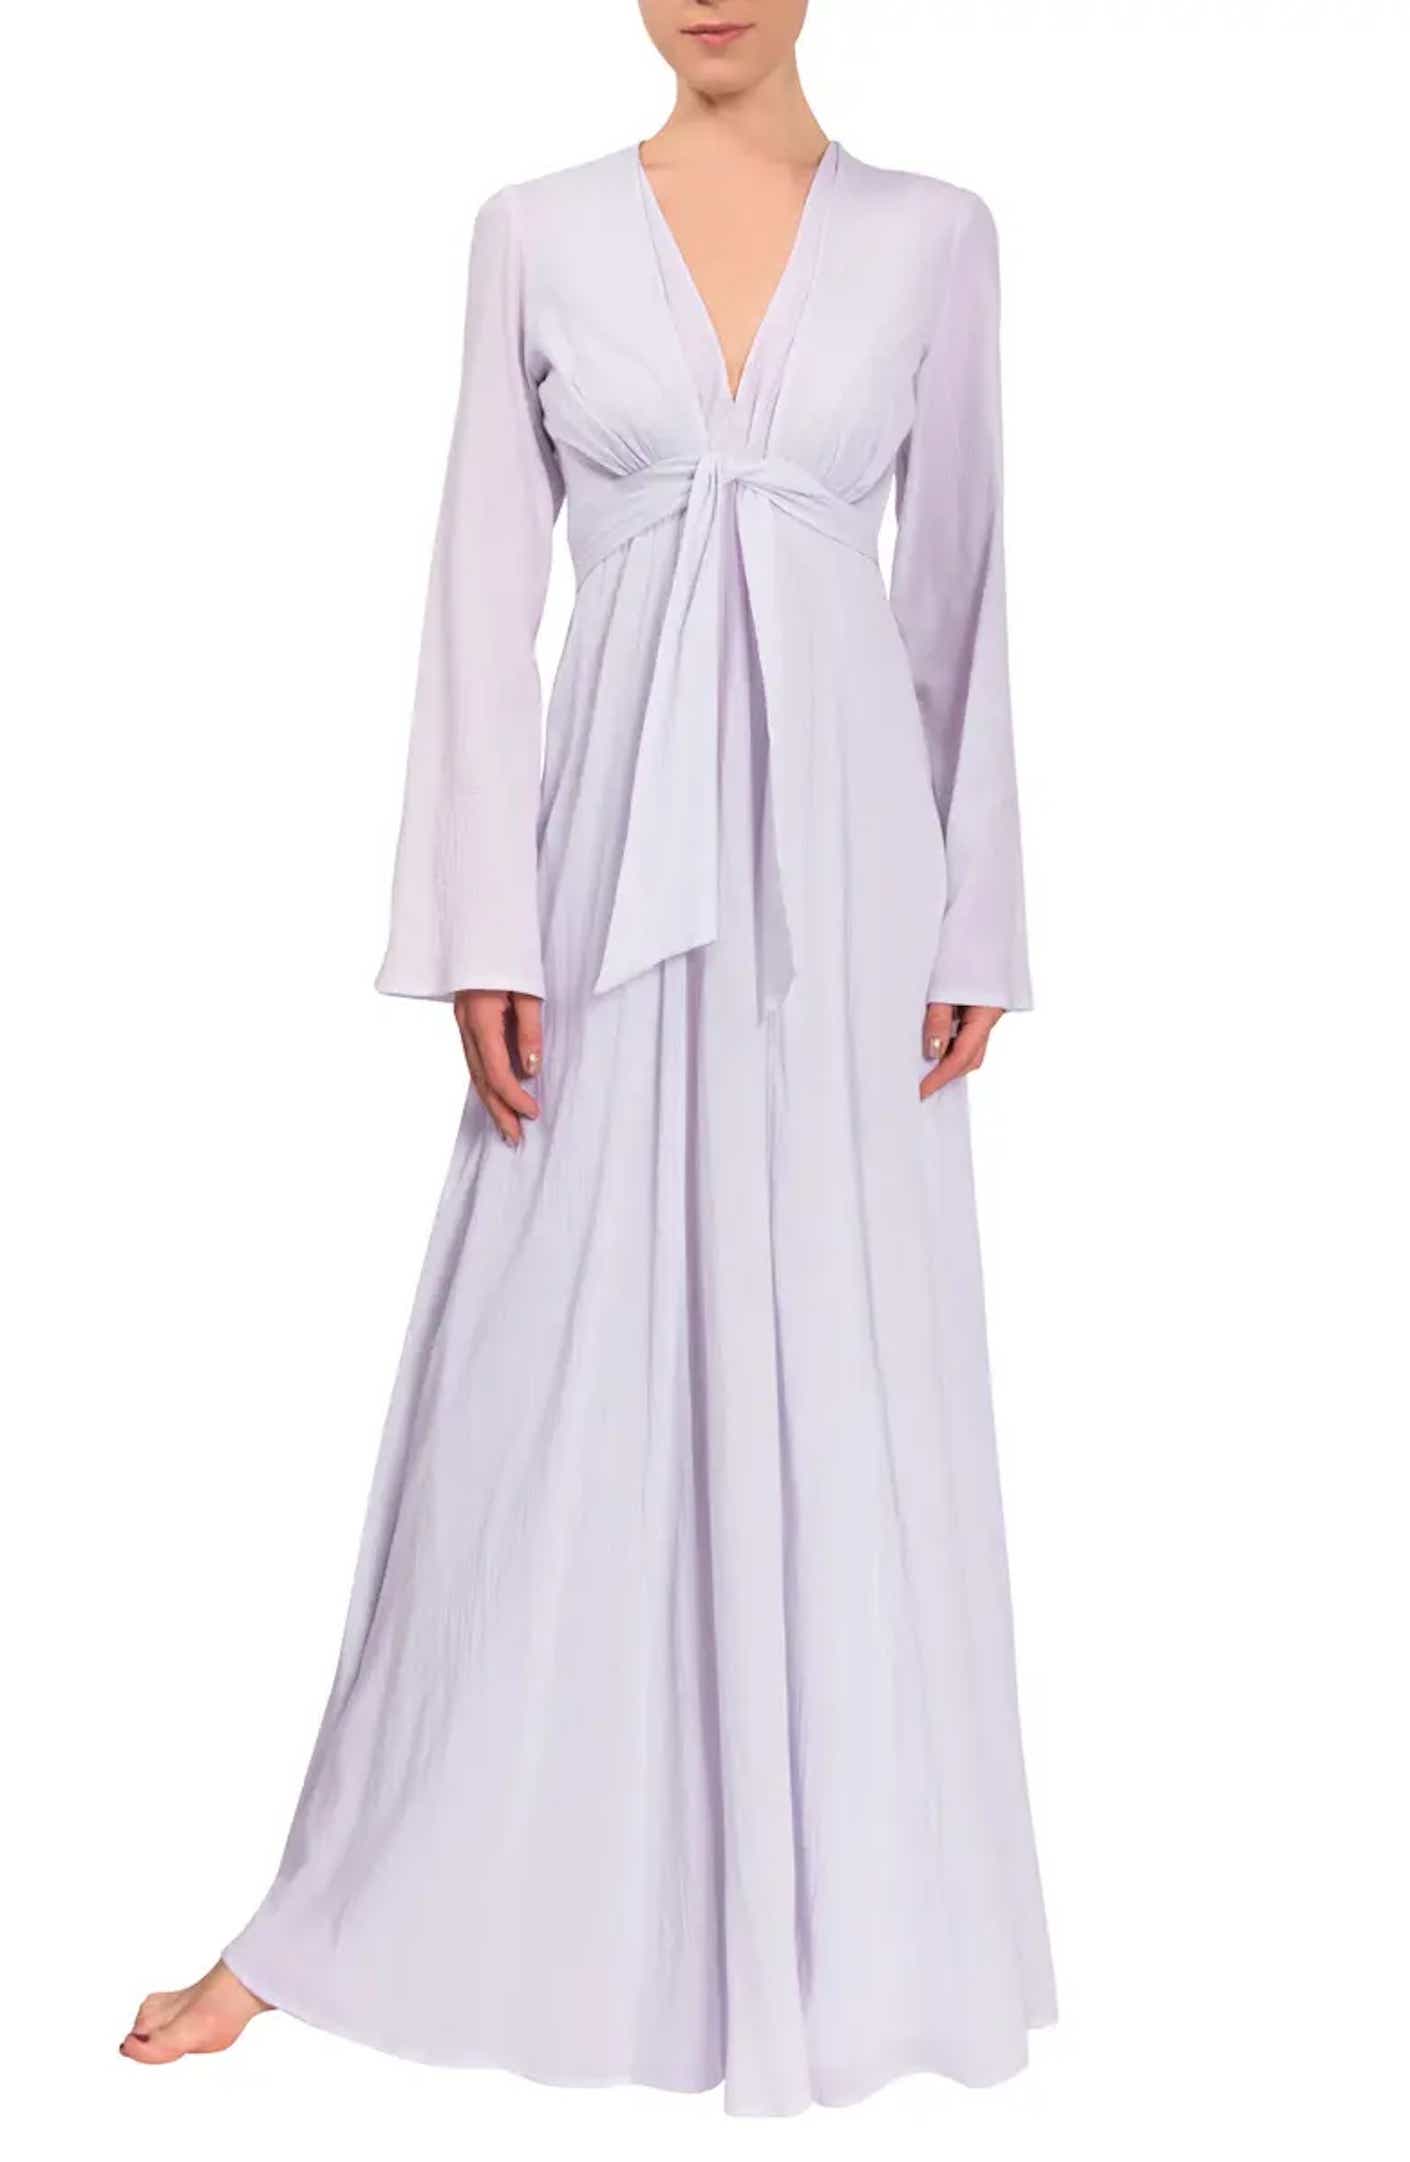 A woman wears a floor length, empire waisted cotton robe in front of a white background.